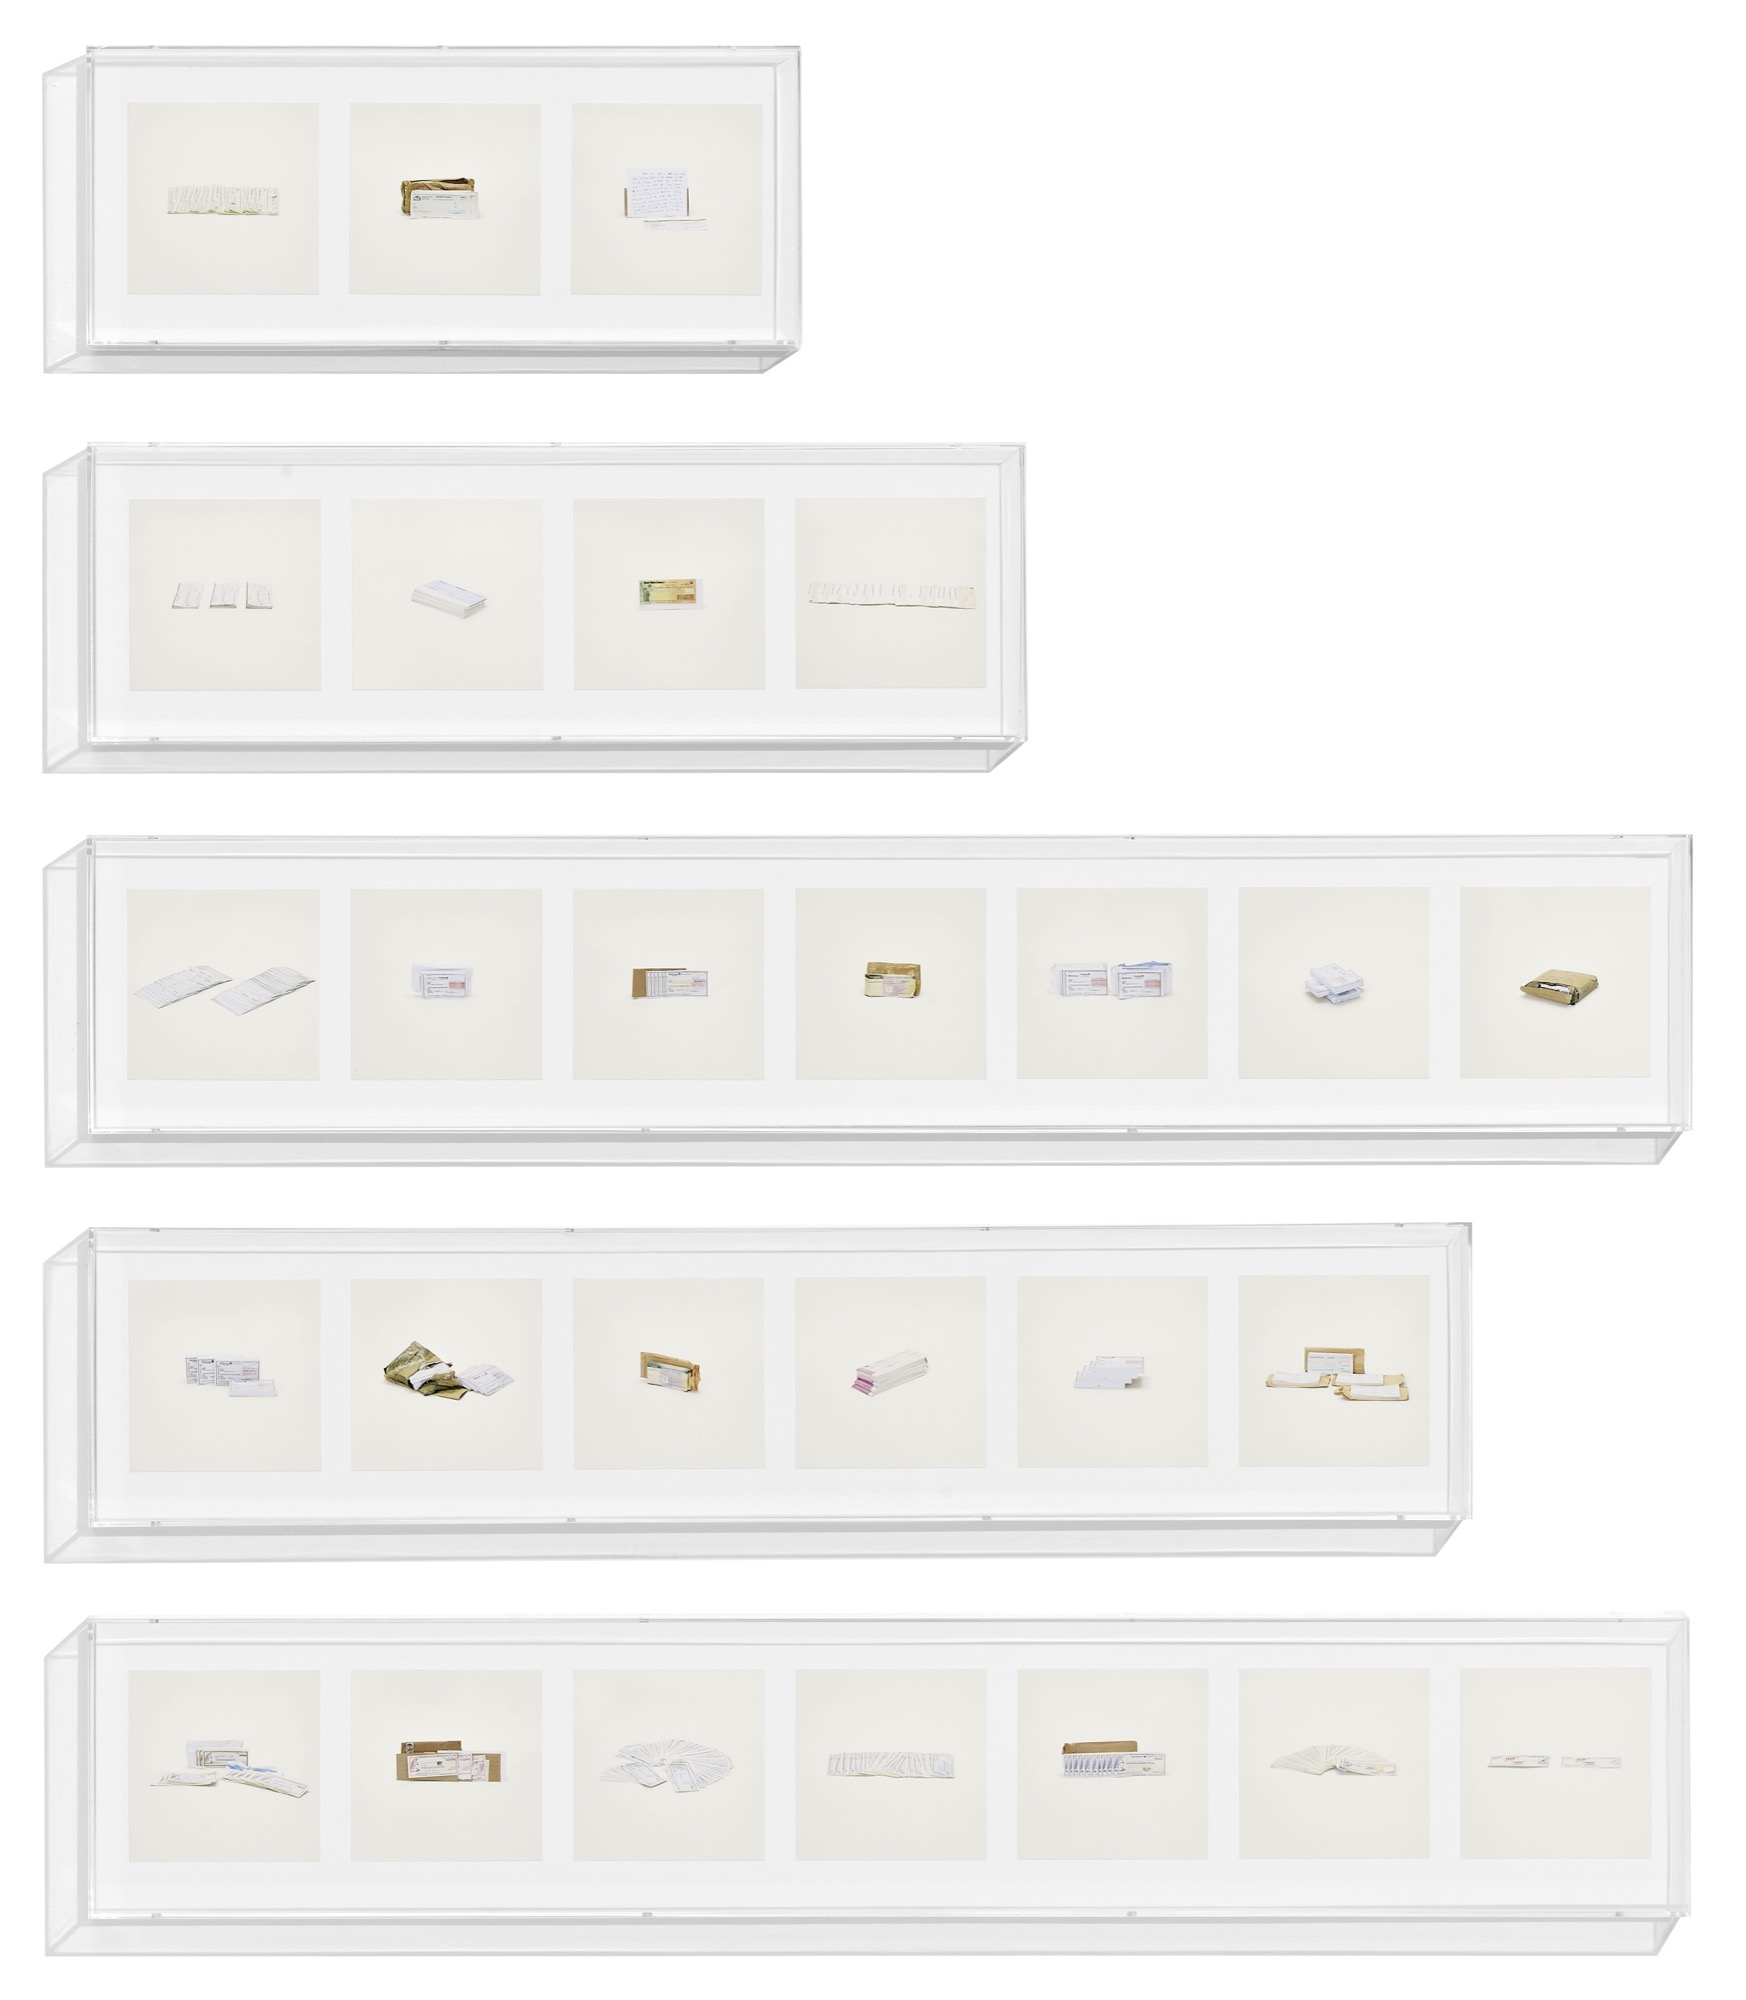 Cashier&#39;s Checks (Counterfeit), Checks (Counterfeit), Money Orders (Counterfeit), Traveler&#39;s Cheques (Counterfeit)<em>, Contraband</em>, 2010, 27 archival inkjet prints in 5 Plexiglas boxes and Letraset on wall, 9 1⁄4 x 22 3⁄4 (#1); 30 (#2); 51 3⁄4 (#3, 5); 44 1⁄2 (#4) inches (23.5 x 57.8; 76.2; 131.4; 113 cm)  © Taryn Simon. Courtesy Gagosian and Anna Schwartz Gallery.